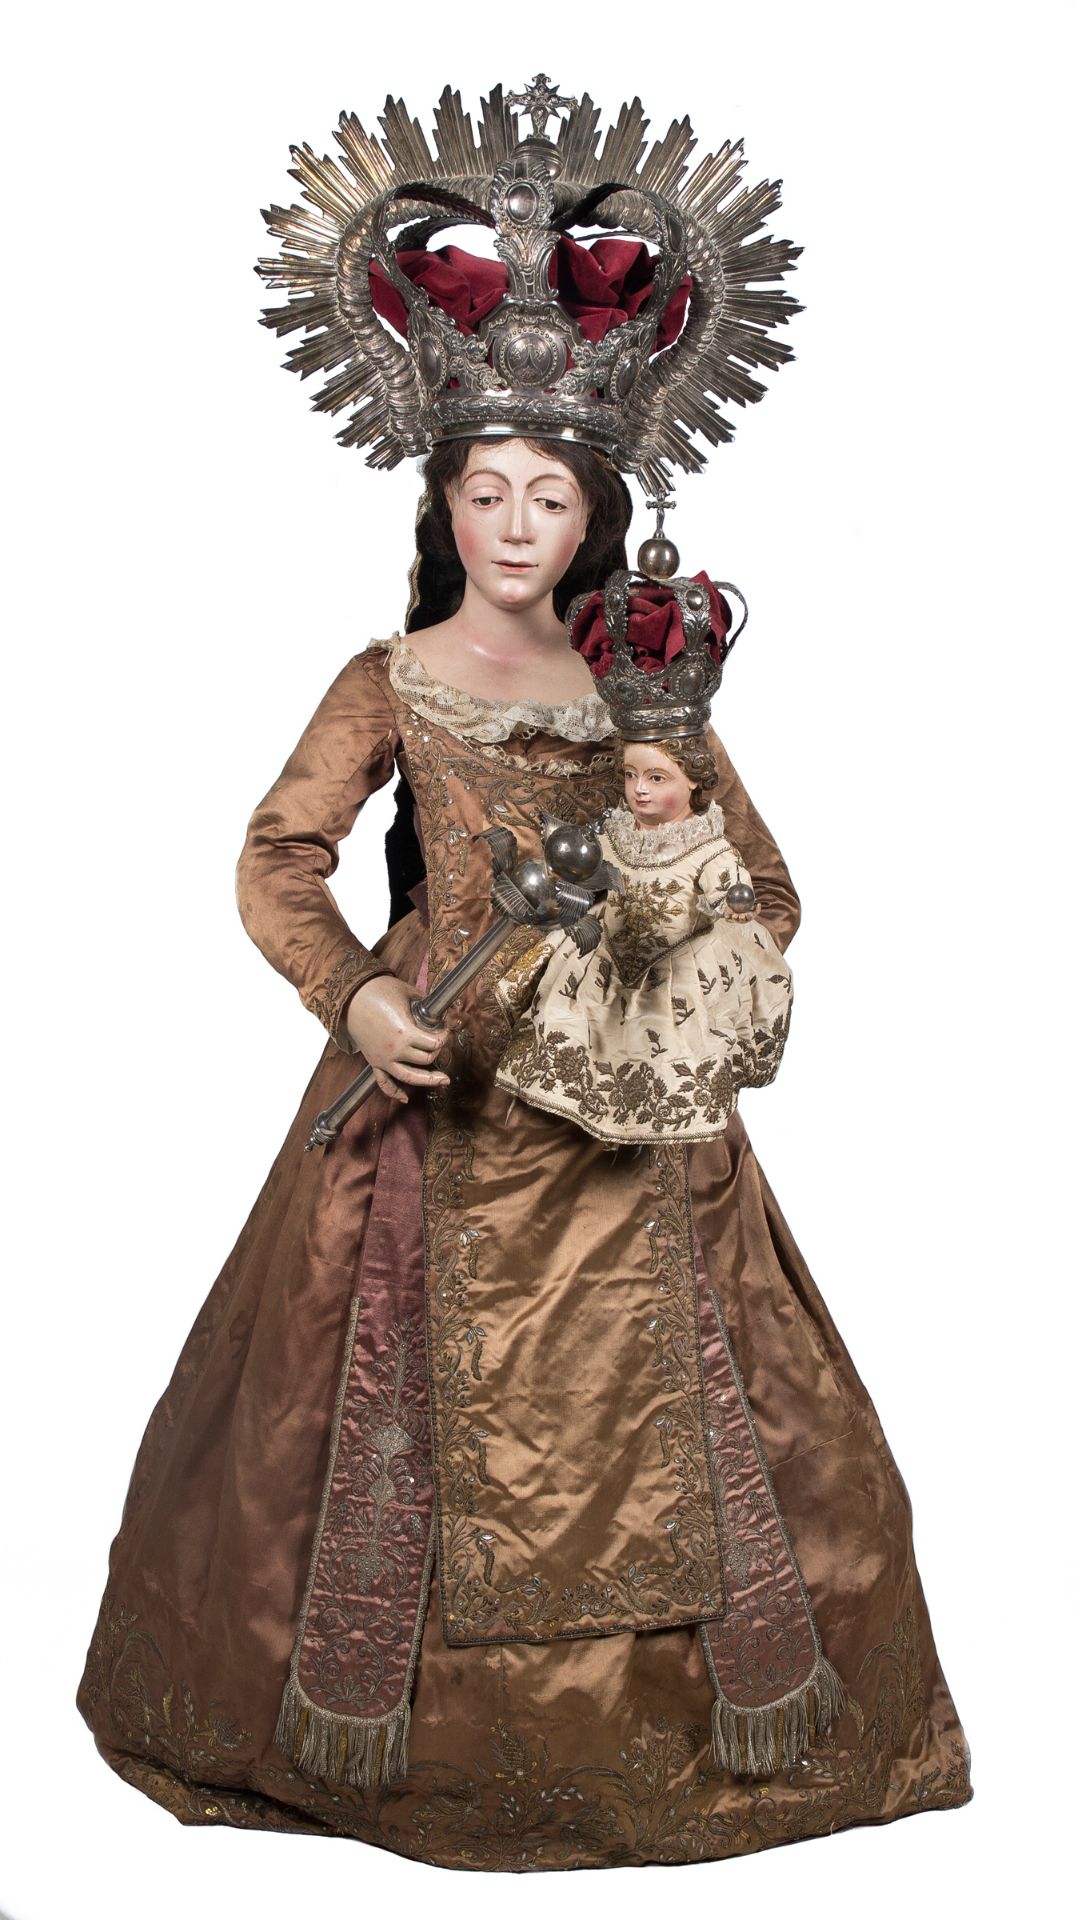 "Madonna and Child". Carved and polychromed wooden sculpture, with silver crowns and staff. Coloni